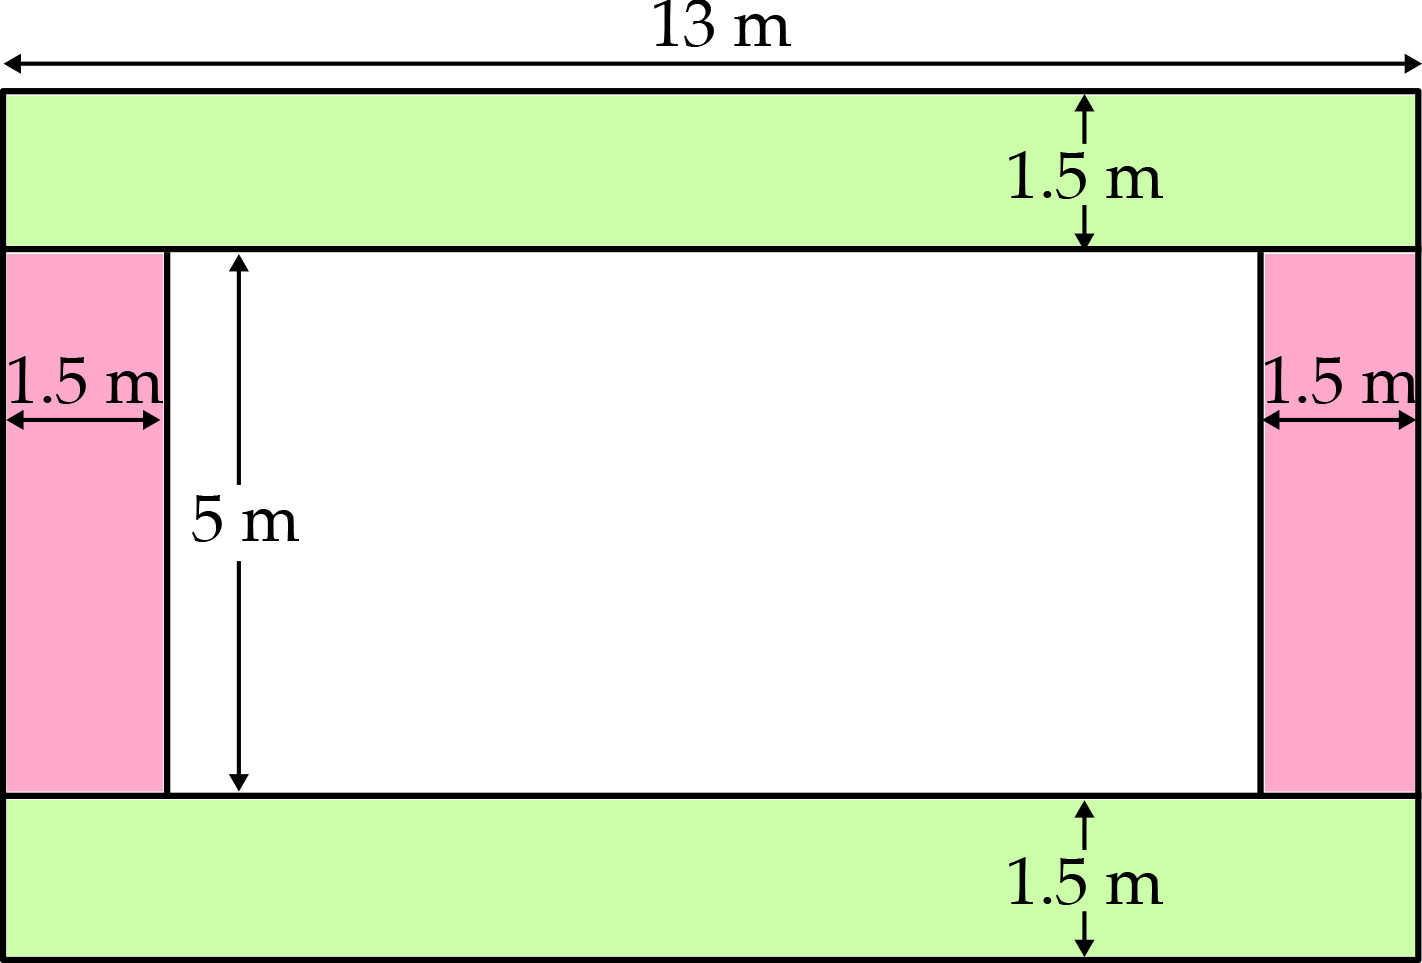 Top and bottom rectangles with dimensions 13 metres by 1.5 metres are lined up 5 metres apart. Their longer sides are horizontal. Two side rectangles with dimensions 5 metres by 1.5 metres lie in between the top and bottom rectangles at either end. Their longer sides are vertical.